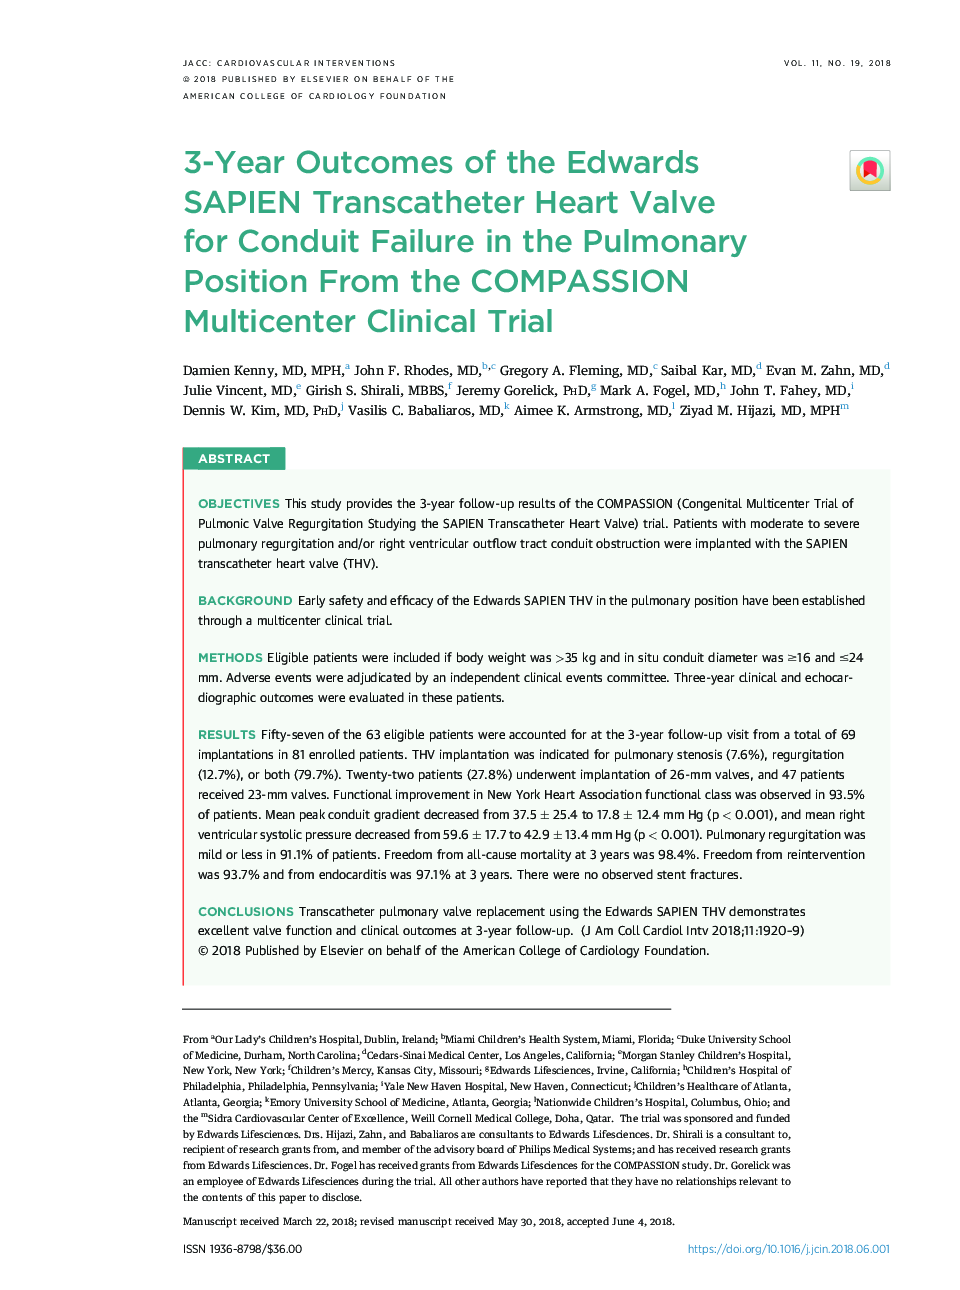 3-Year Outcomes of the Edwards SAPIEN Transcatheter Heart Valve forÂ Conduit Failure in the Pulmonary Position From the COMPASSION Multicenter Clinical Trial